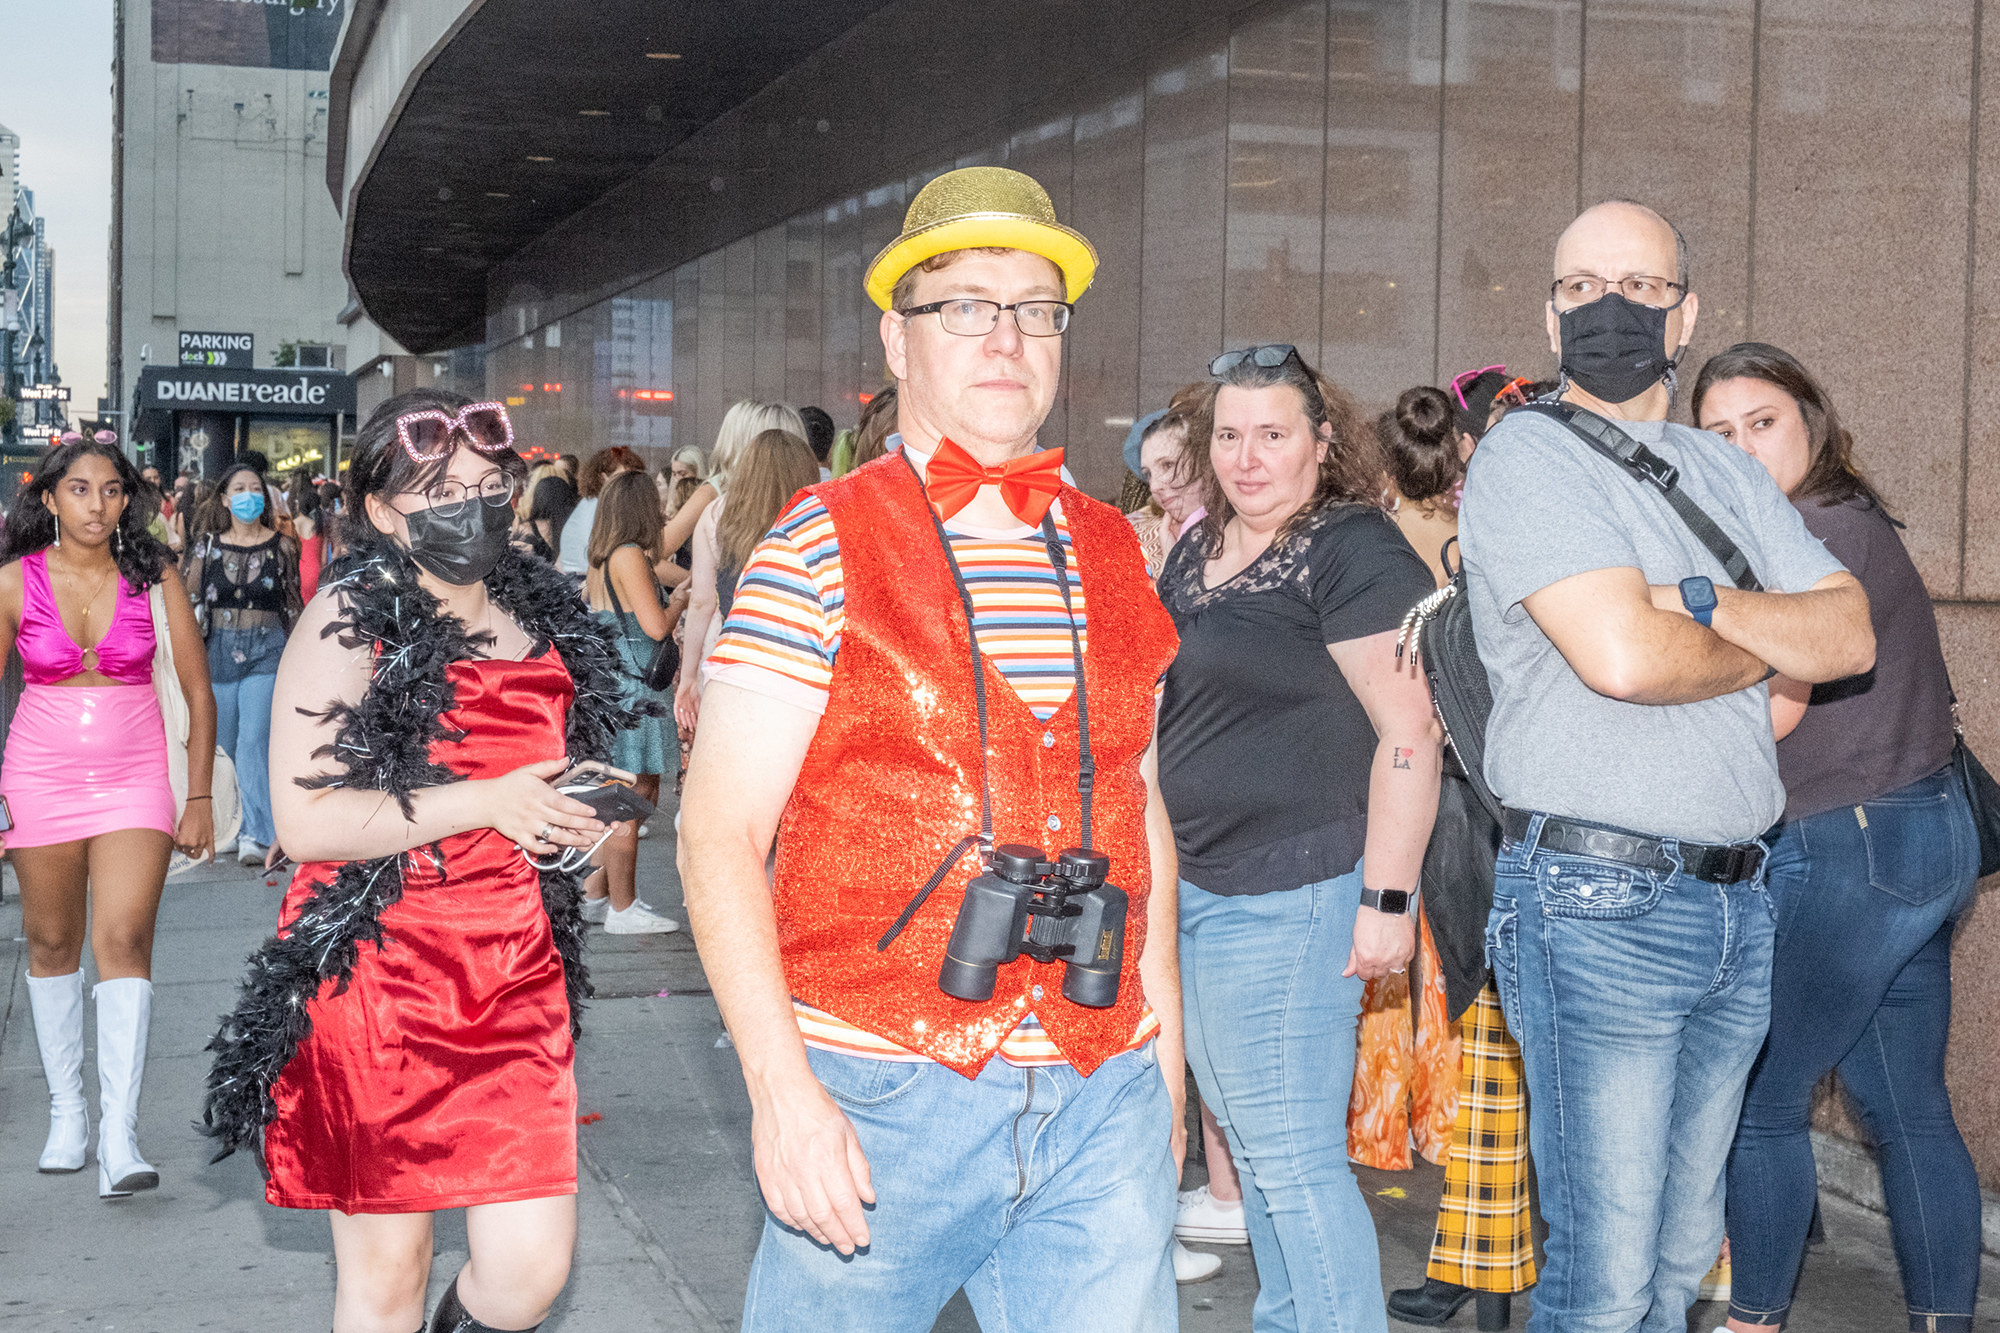 A man with a tiny yellow bowler hat, sparkly orange vest, and binoculars waits in line outside Madison Square Garden